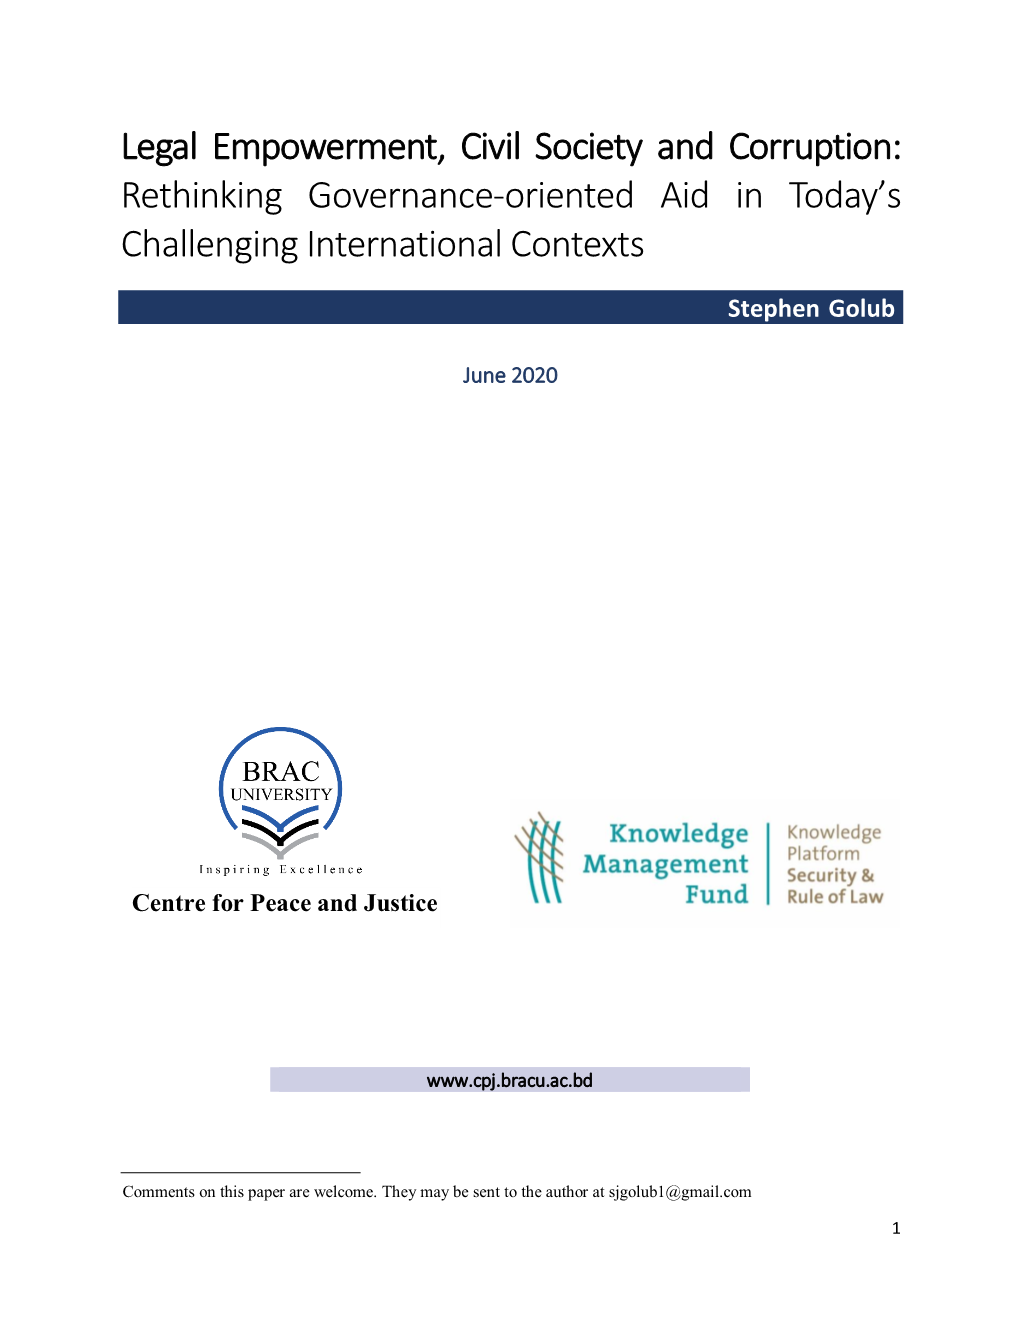 Legal Empowerment, Civil Society and Corruption: Rethinking Governance-Oriented Aid in Today’S Challenging International Contexts